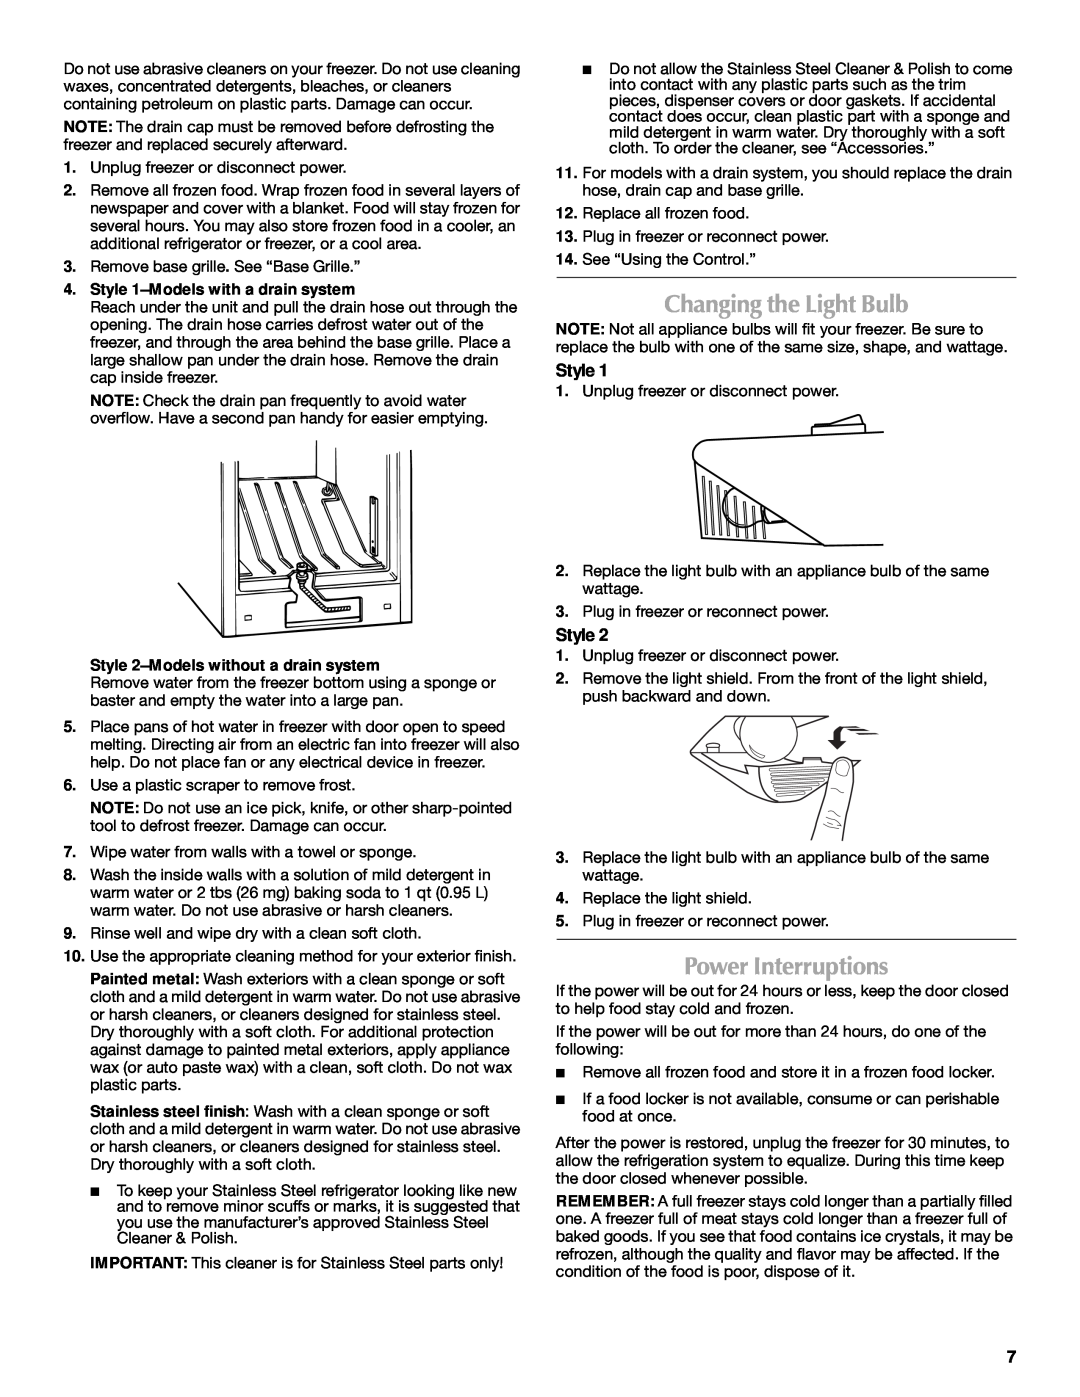 Maytag 1-82180-002 manual Changing the Light Bulb, Power Interruptions, Style 1-Models with a drain system 